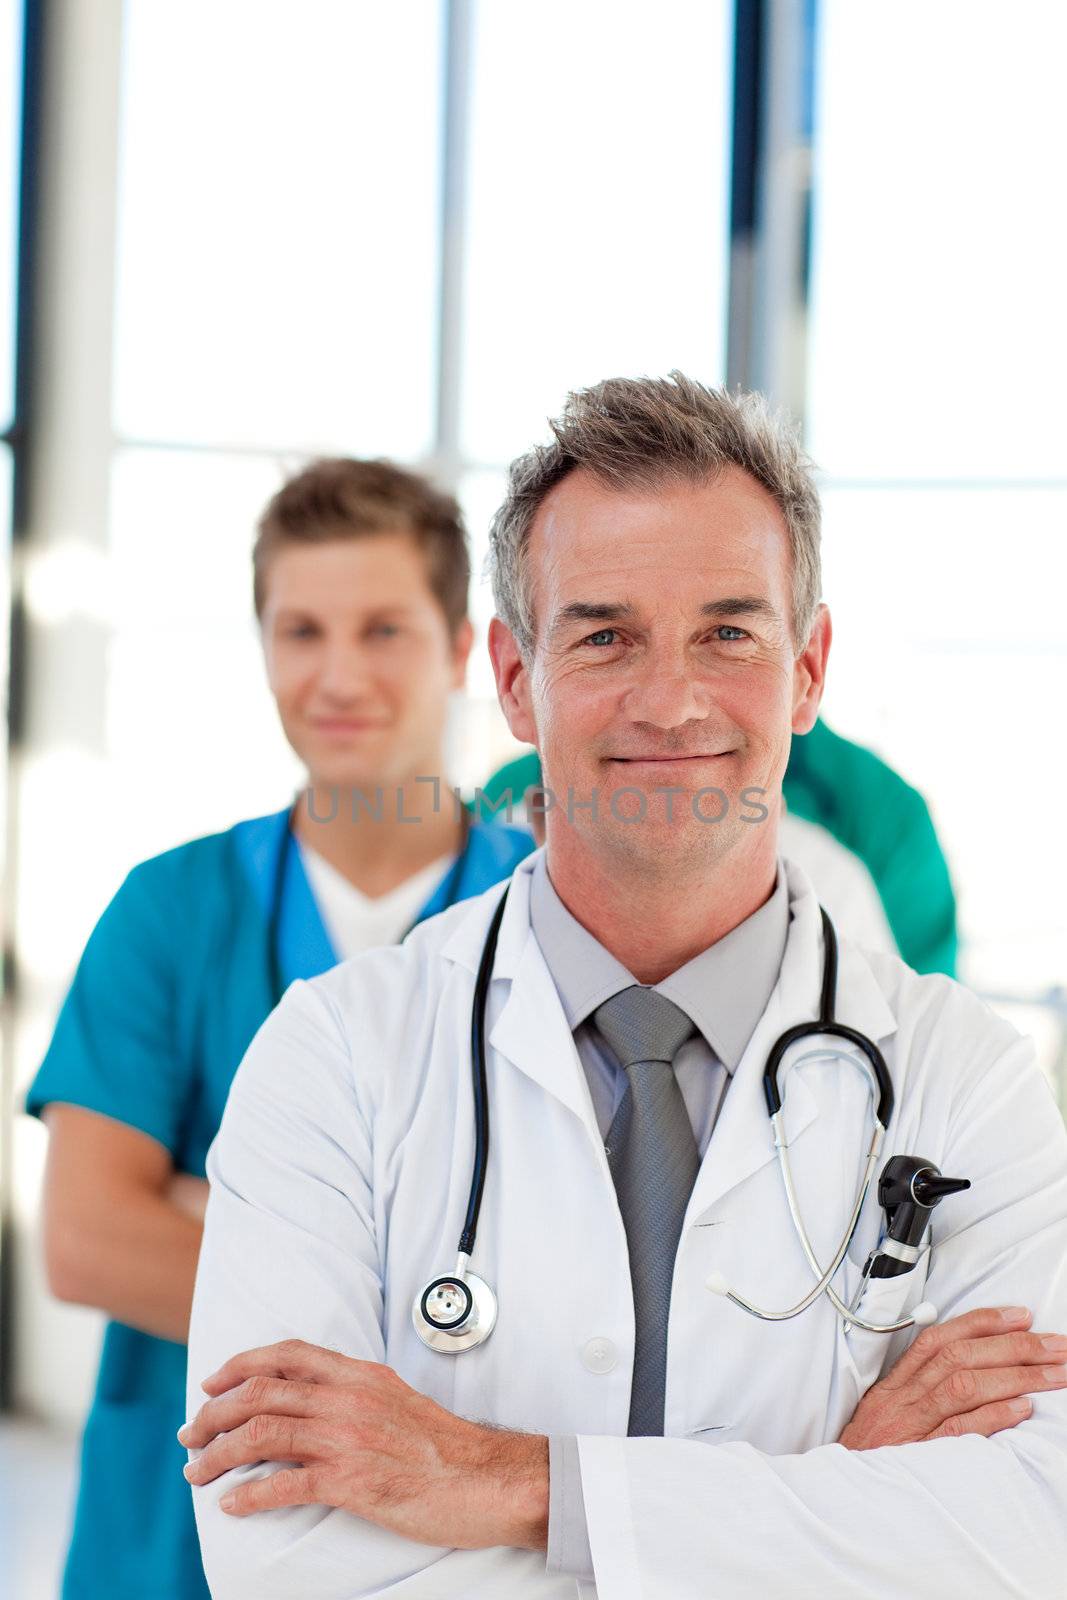 Mature doctor leading his team in hospital with copy-space